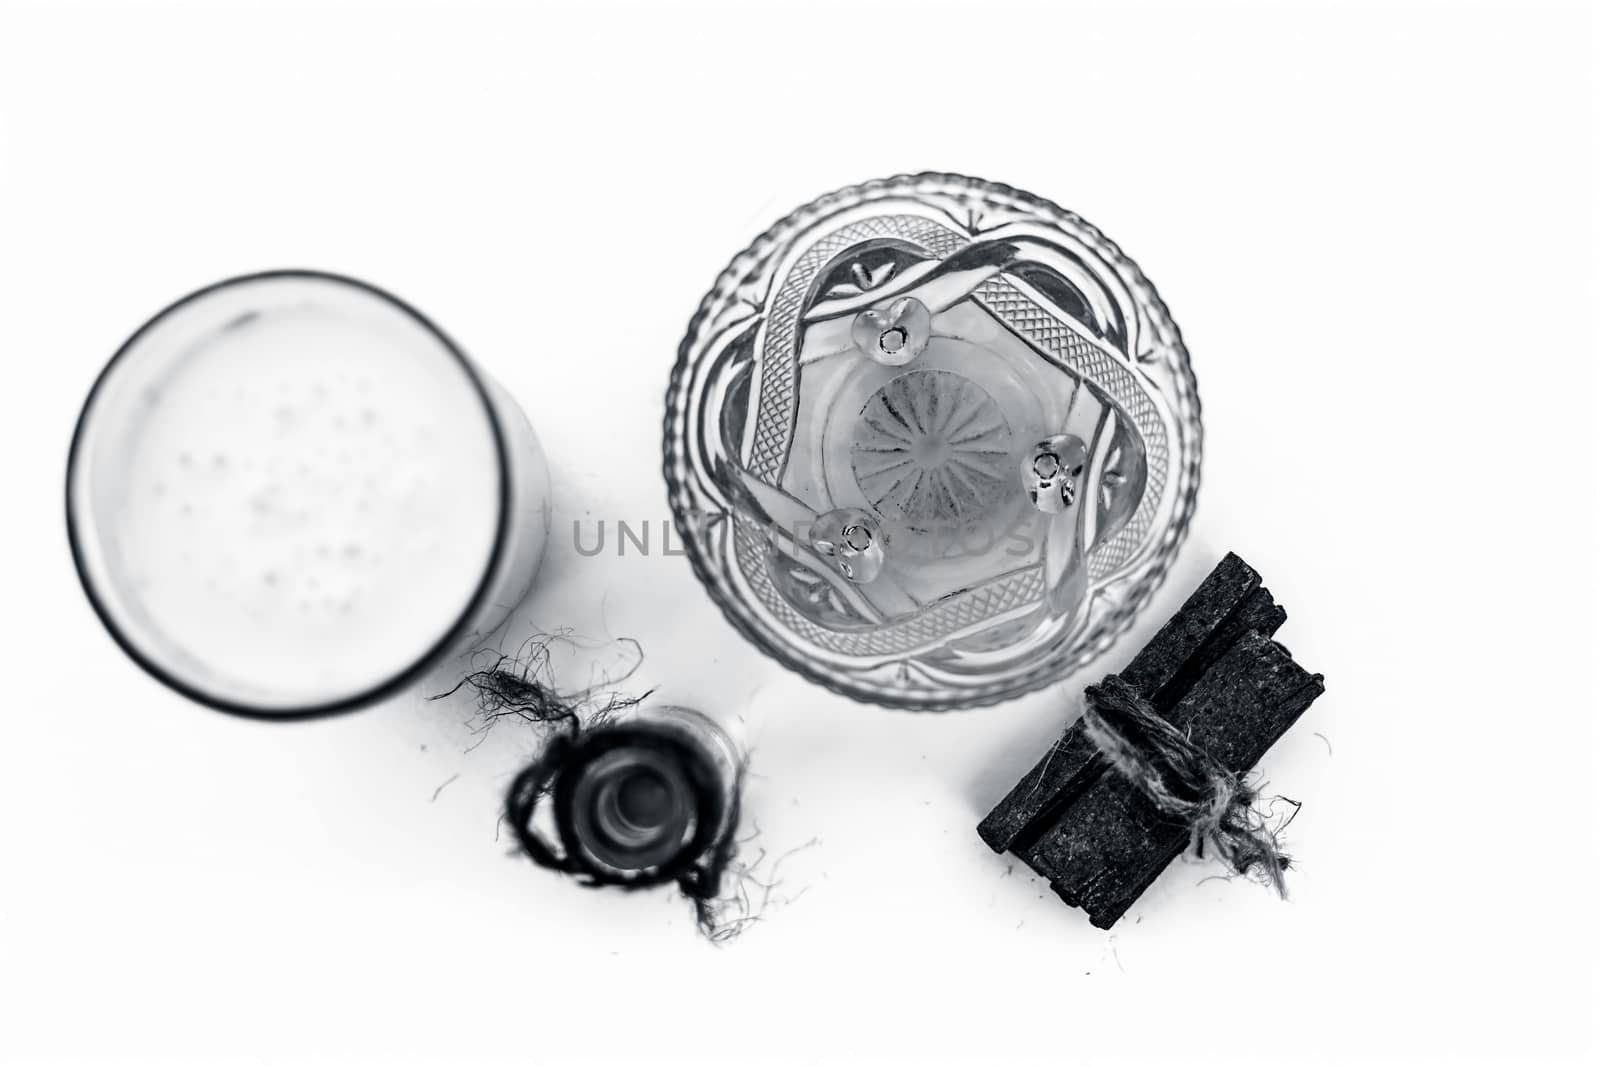 Close up of popular Indian & Asian winter drink isolated on white i.e Honey milk or shahad ka dudh in a transparent glass with entire ingredients which are milk,honey, and dry fruits.